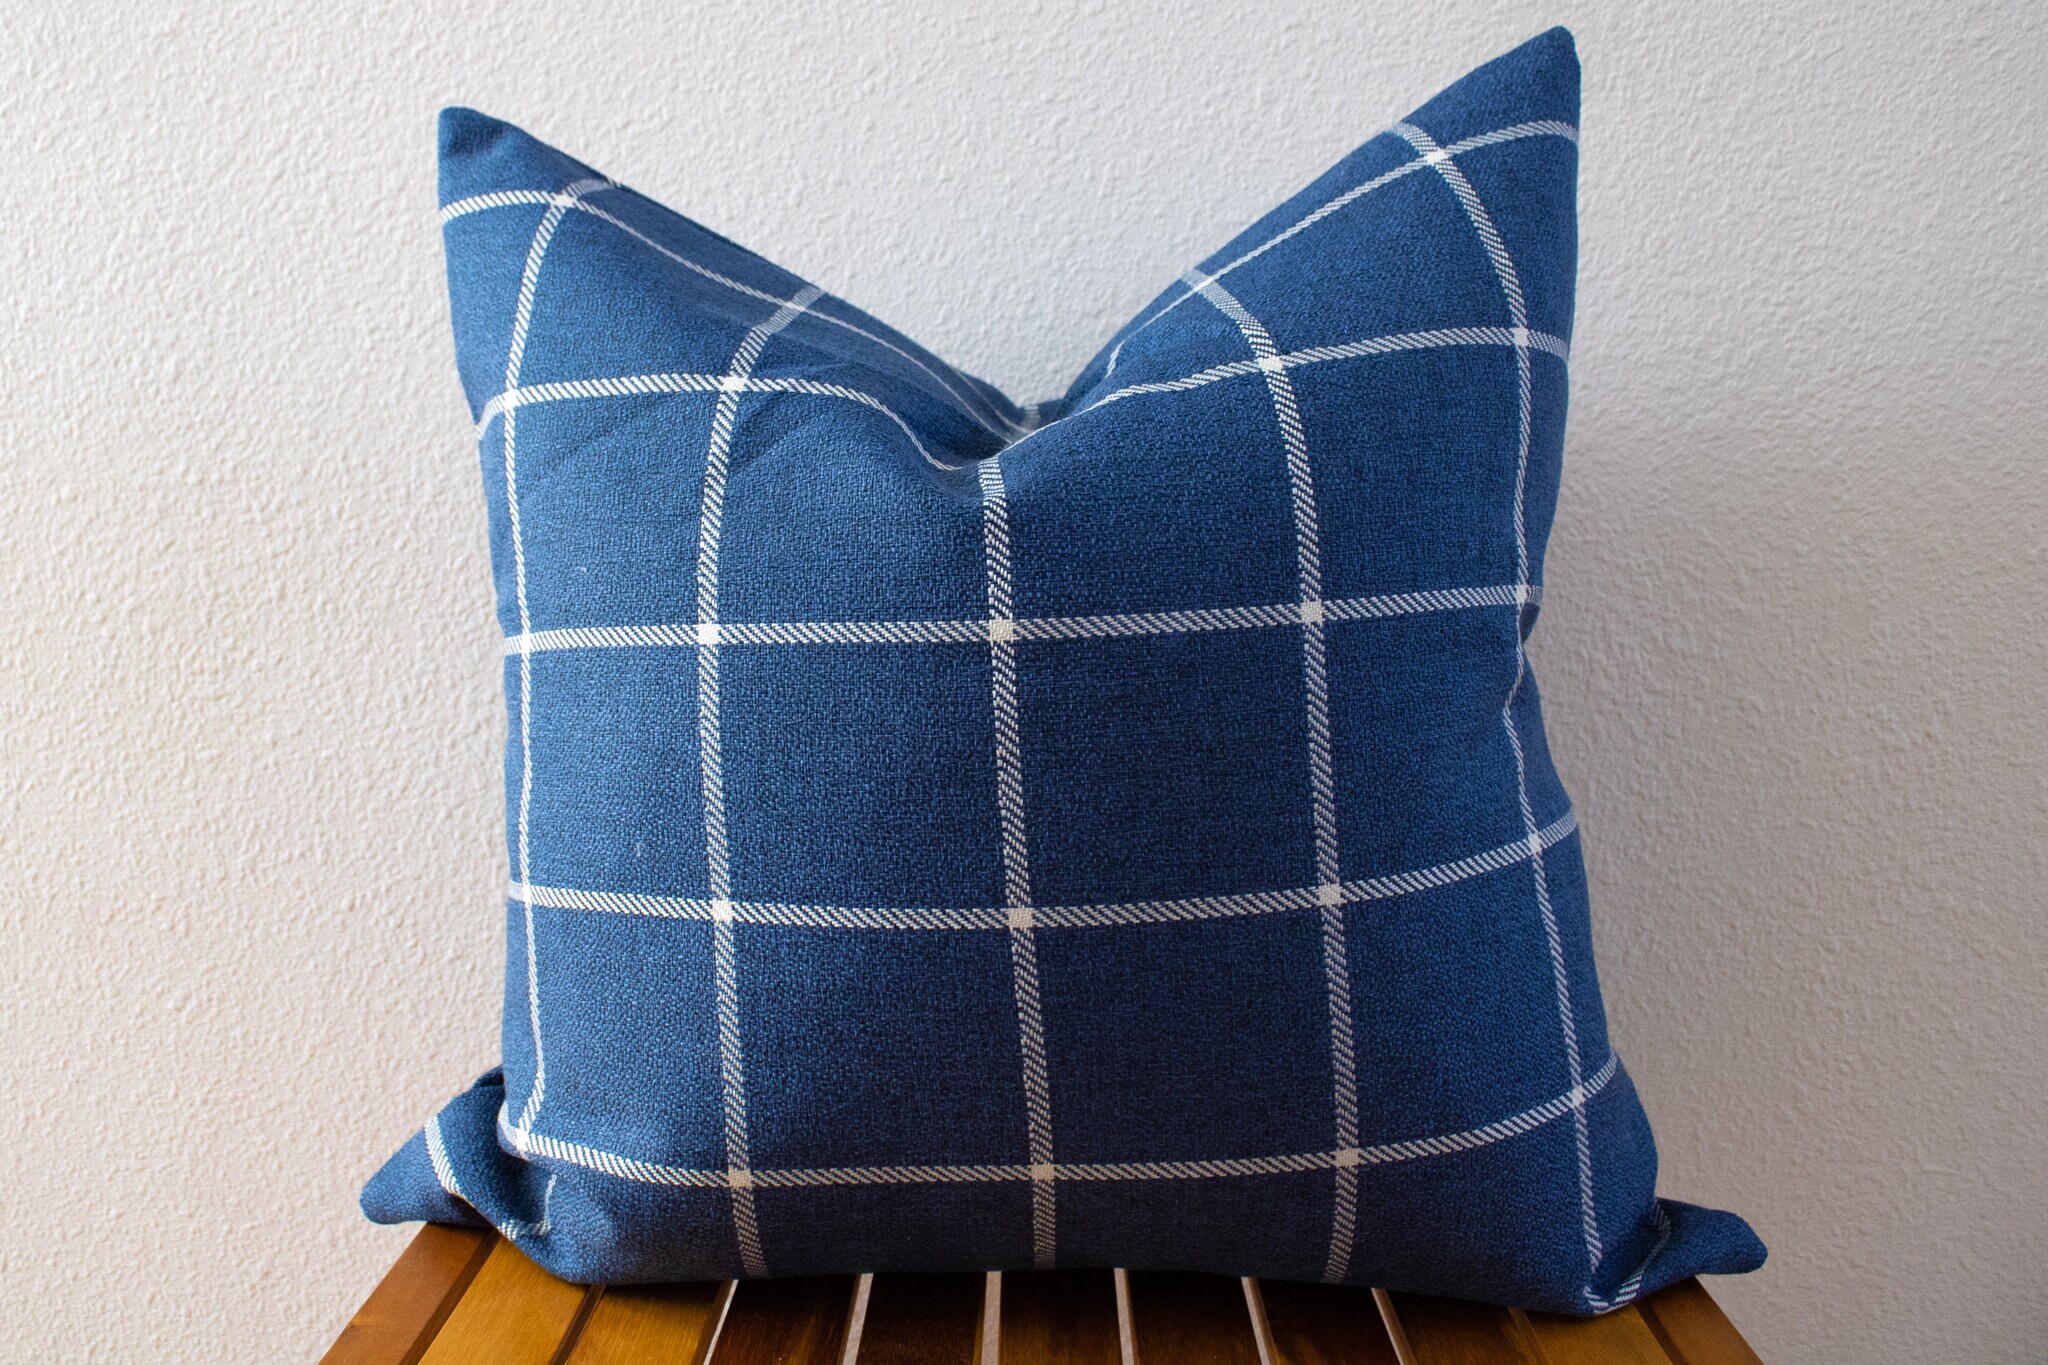 20x20 blue plaid throw pillow cover • decorative pillow covers for couch bedding • in or outdoor pillow cover • designer organic fabric